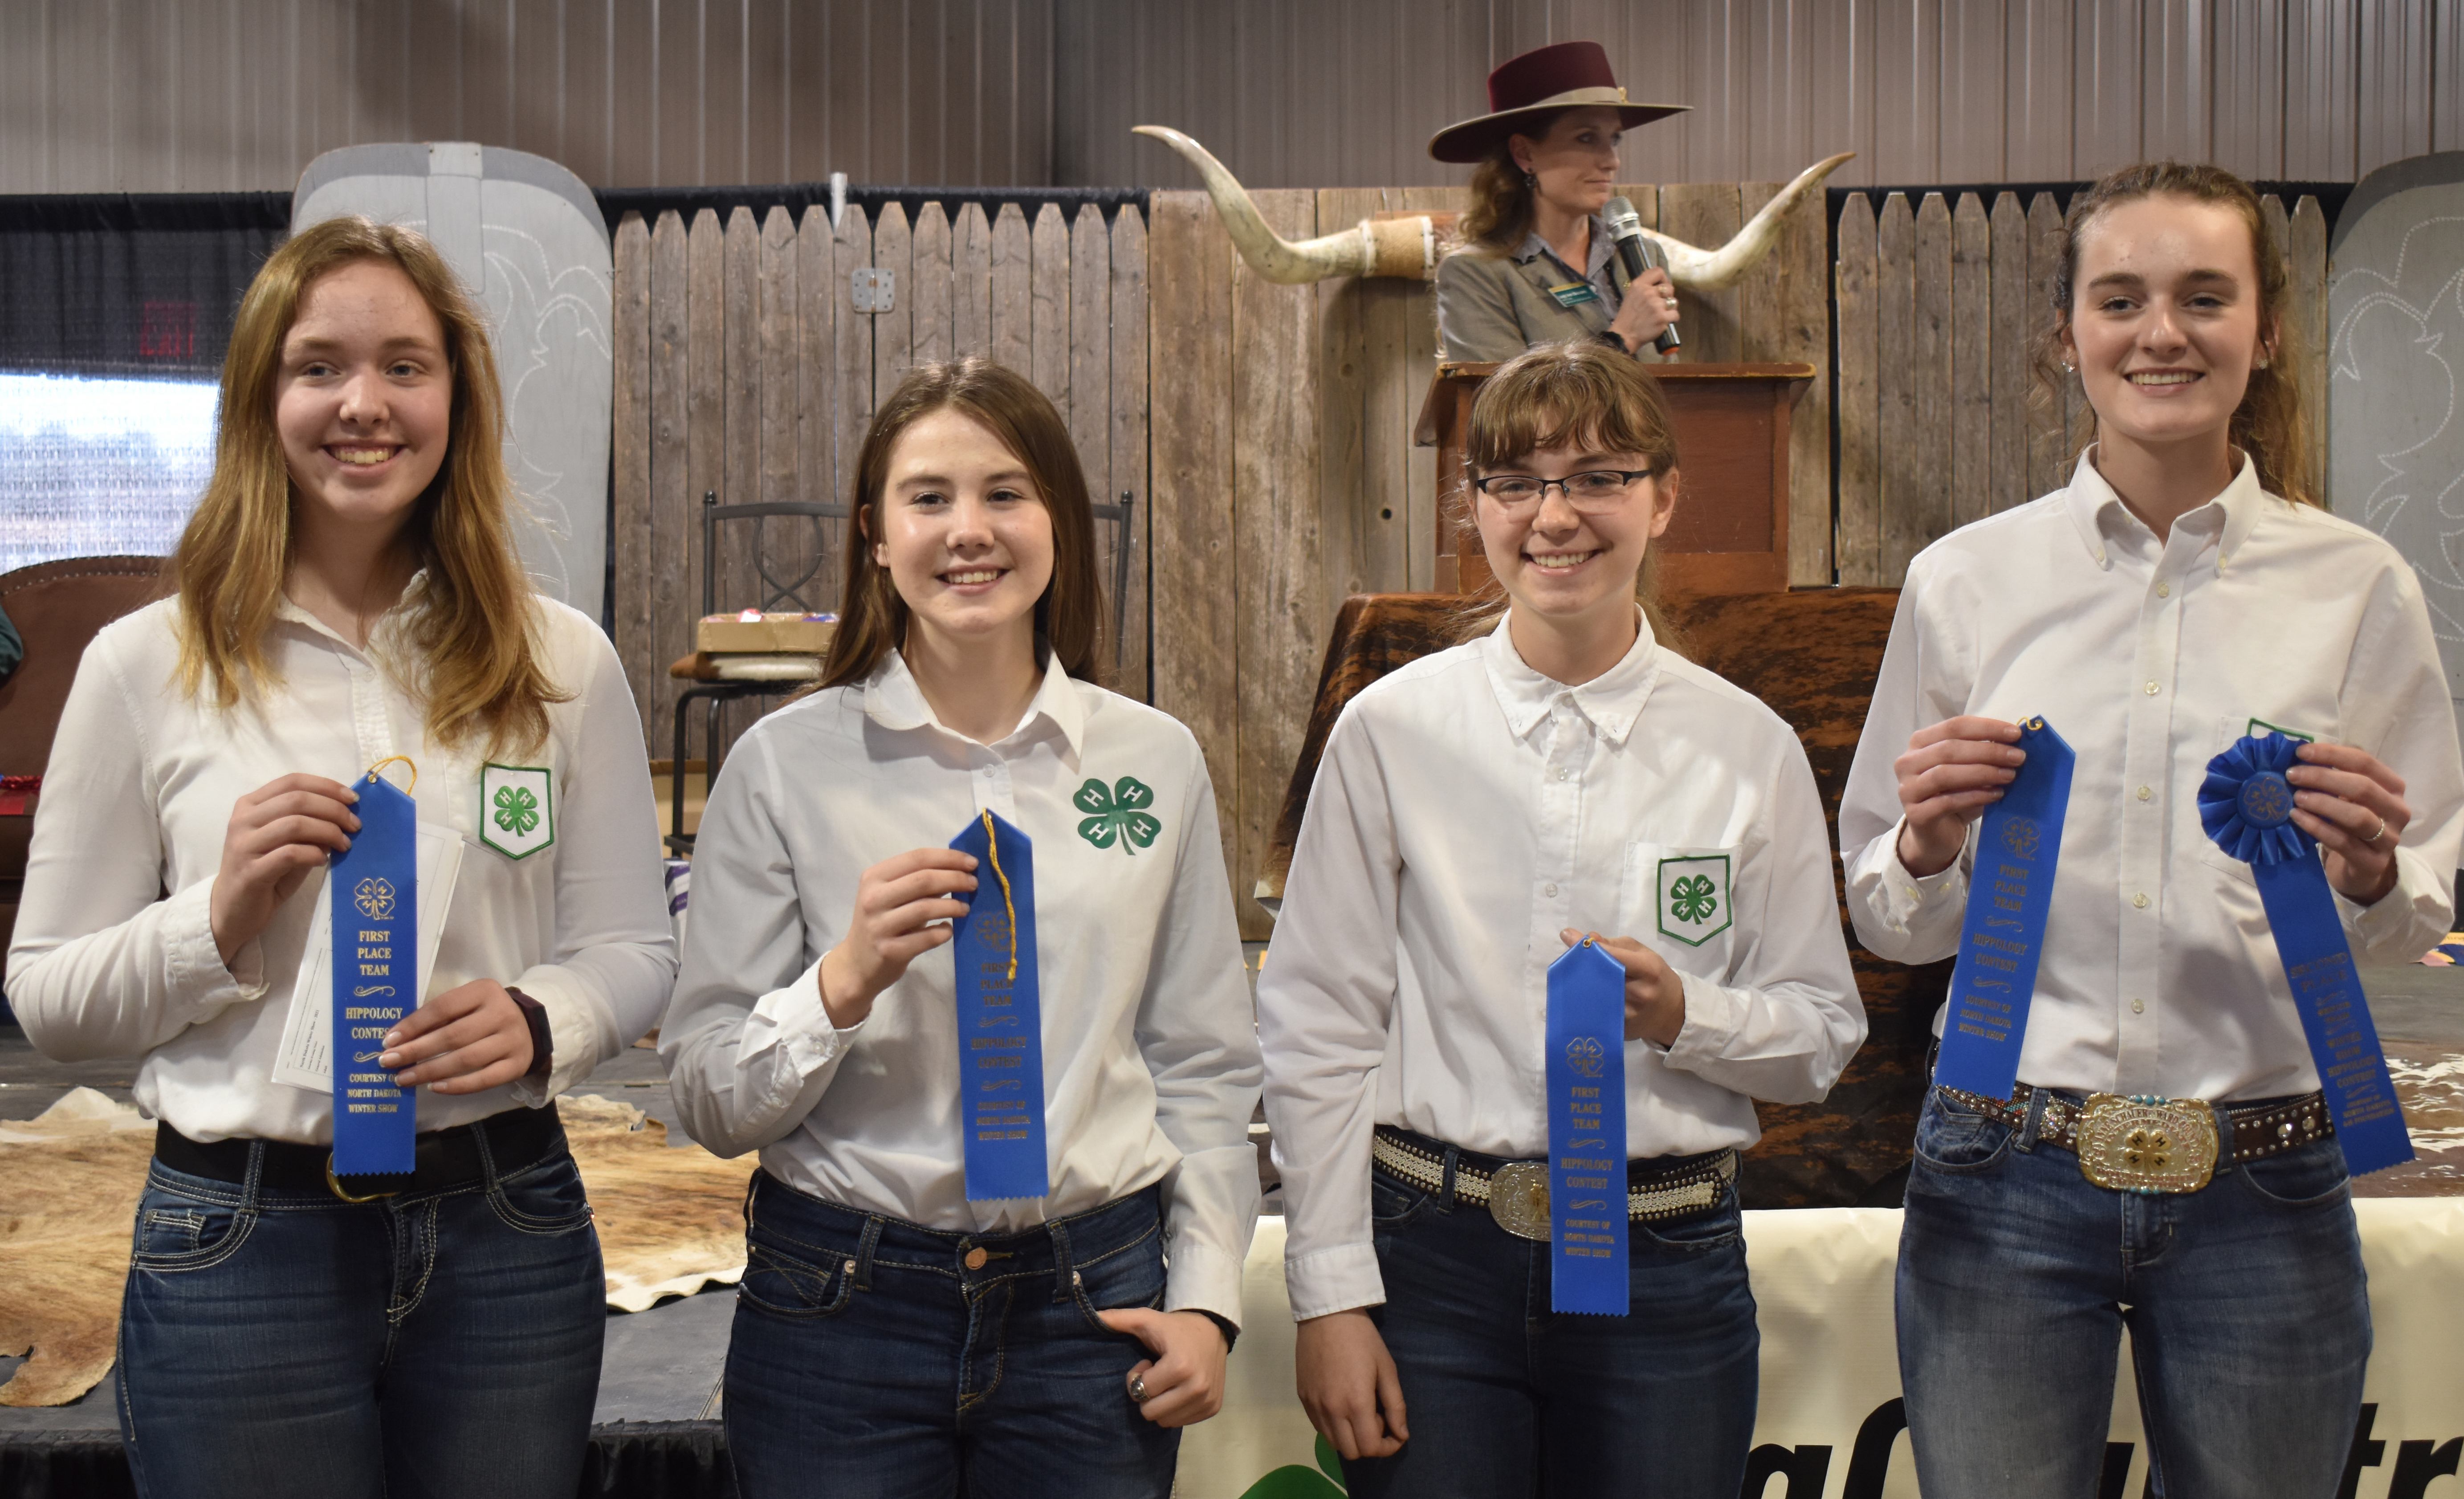 The Ward County 4-H team took first place in the senior division of the Winter Show hippology contest. Pictured are, from left: Olivia Lebrun, Emily Fannik, Mikaela Woodruff and Anne Schauer. (NDSU photo)